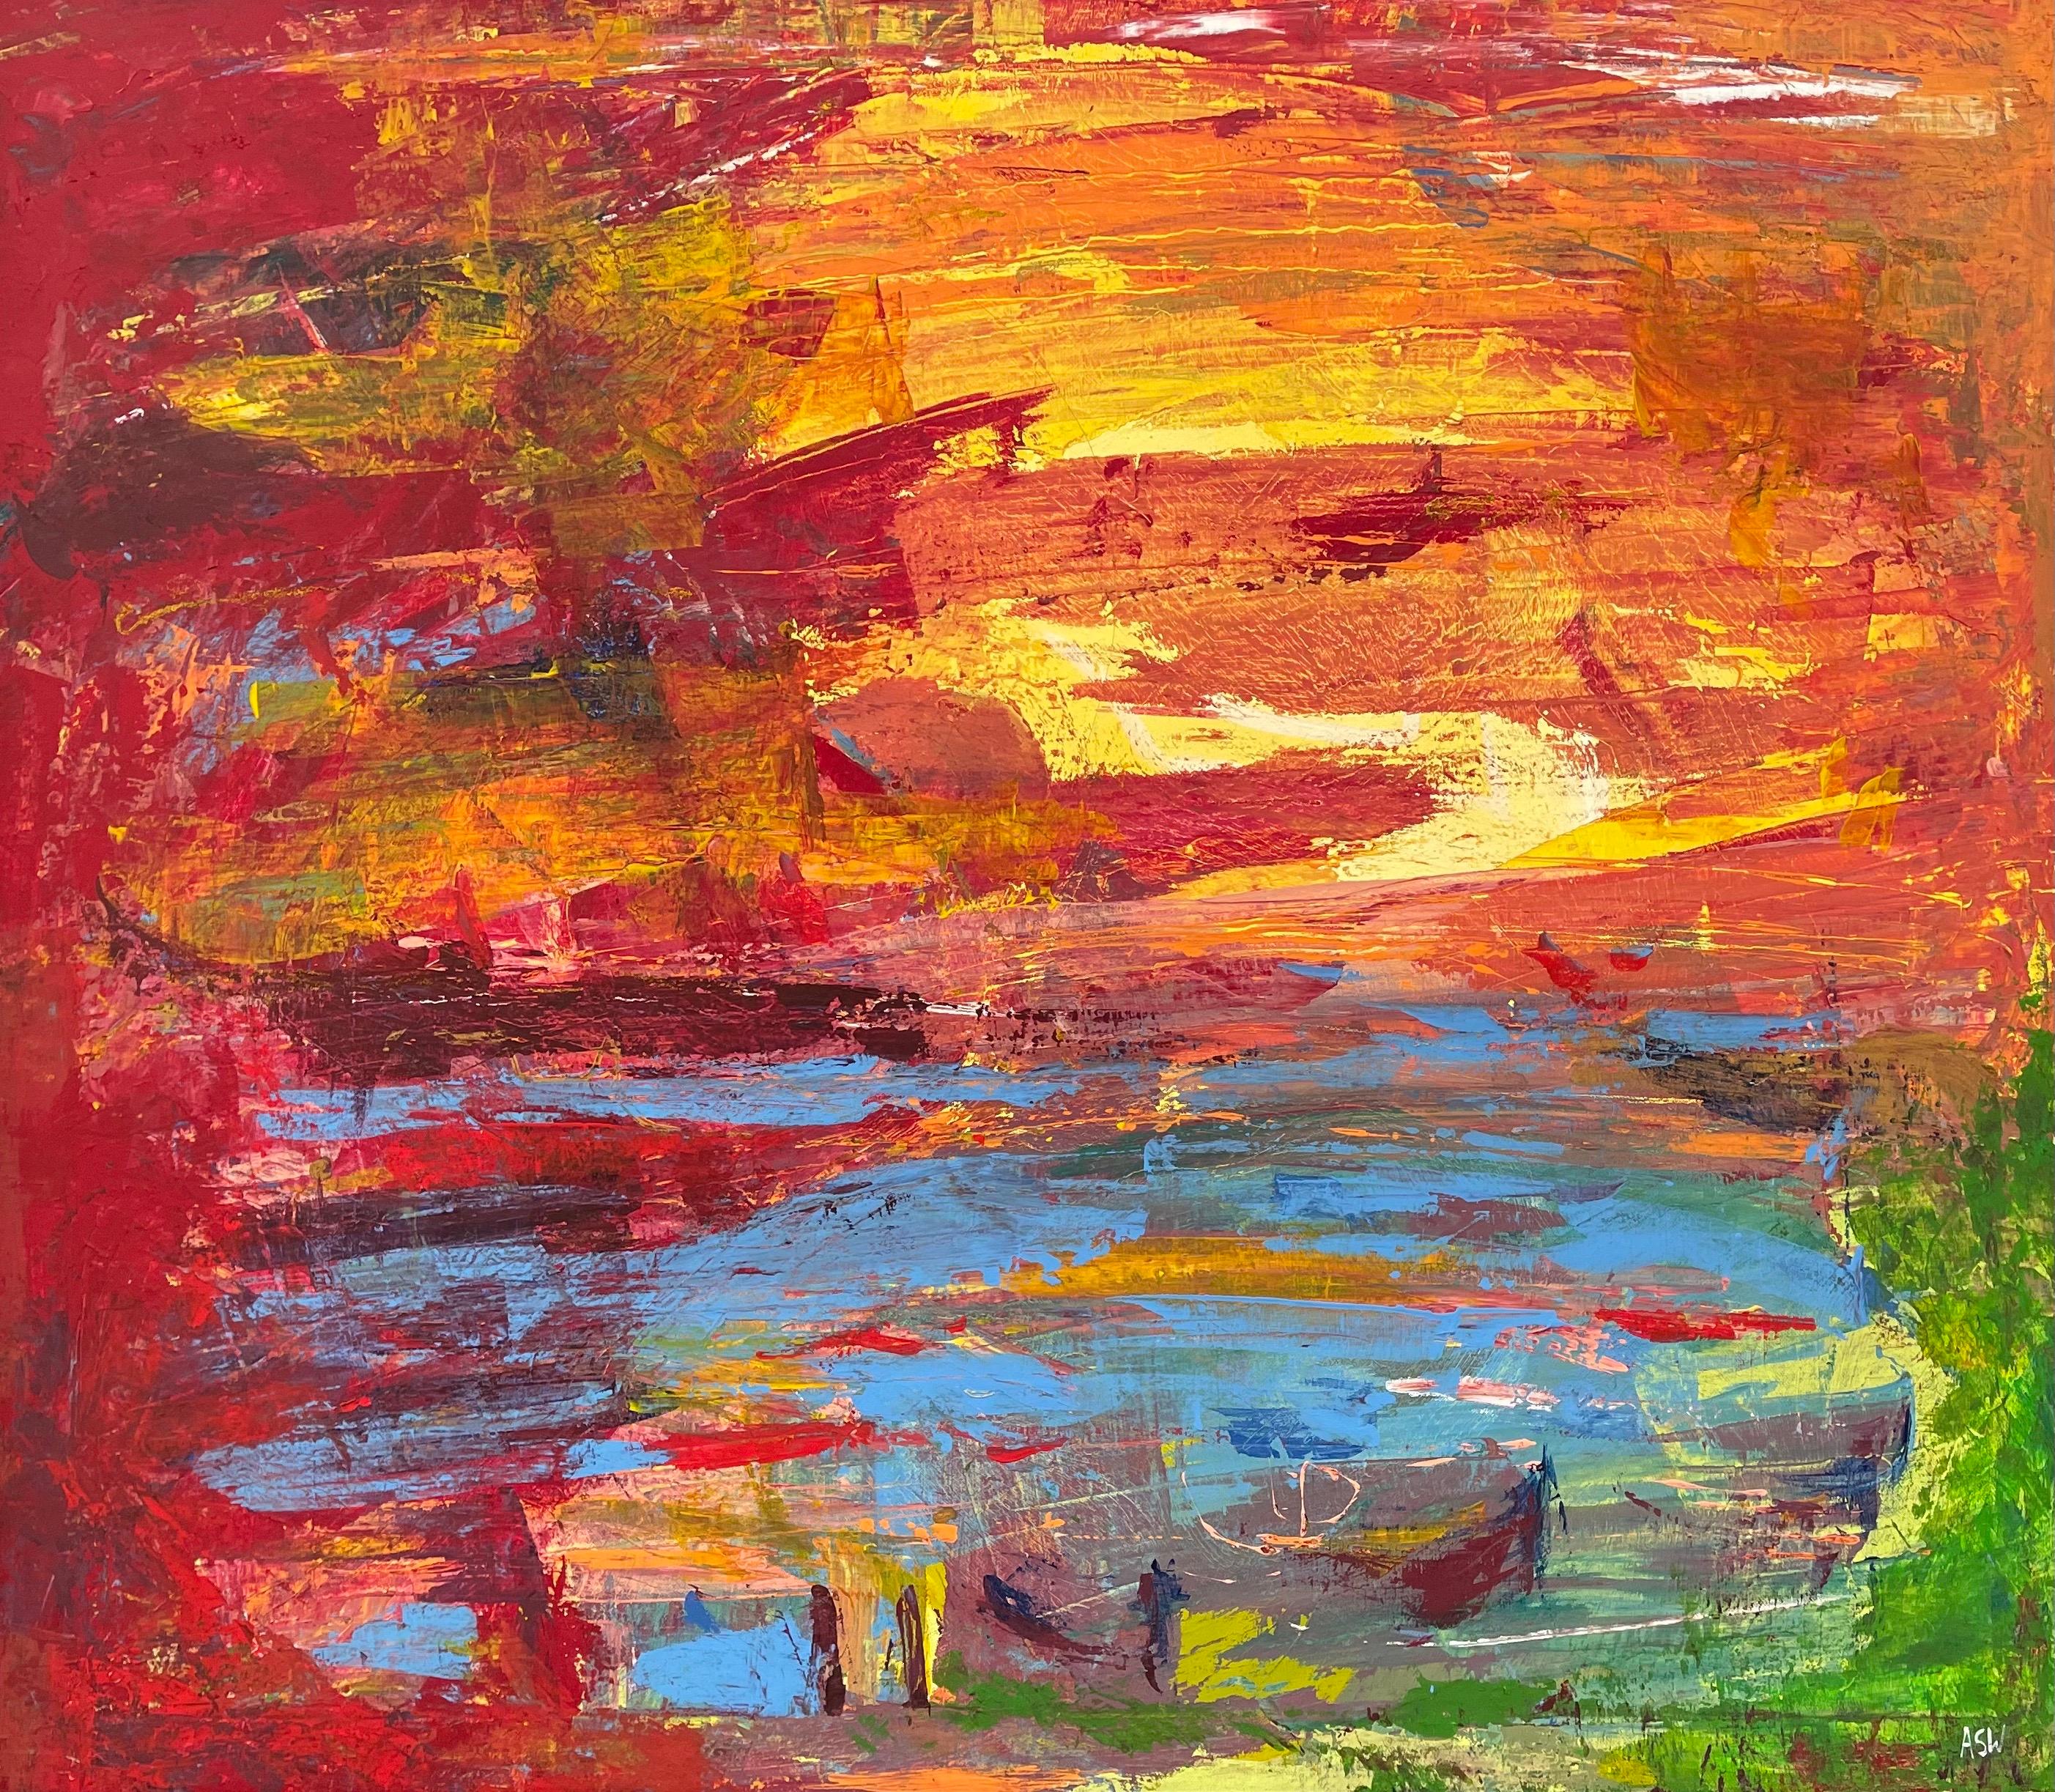 Abstract Blue Orange & Red Lake Sunset Landscape by Contemporary British Artist For Sale 8